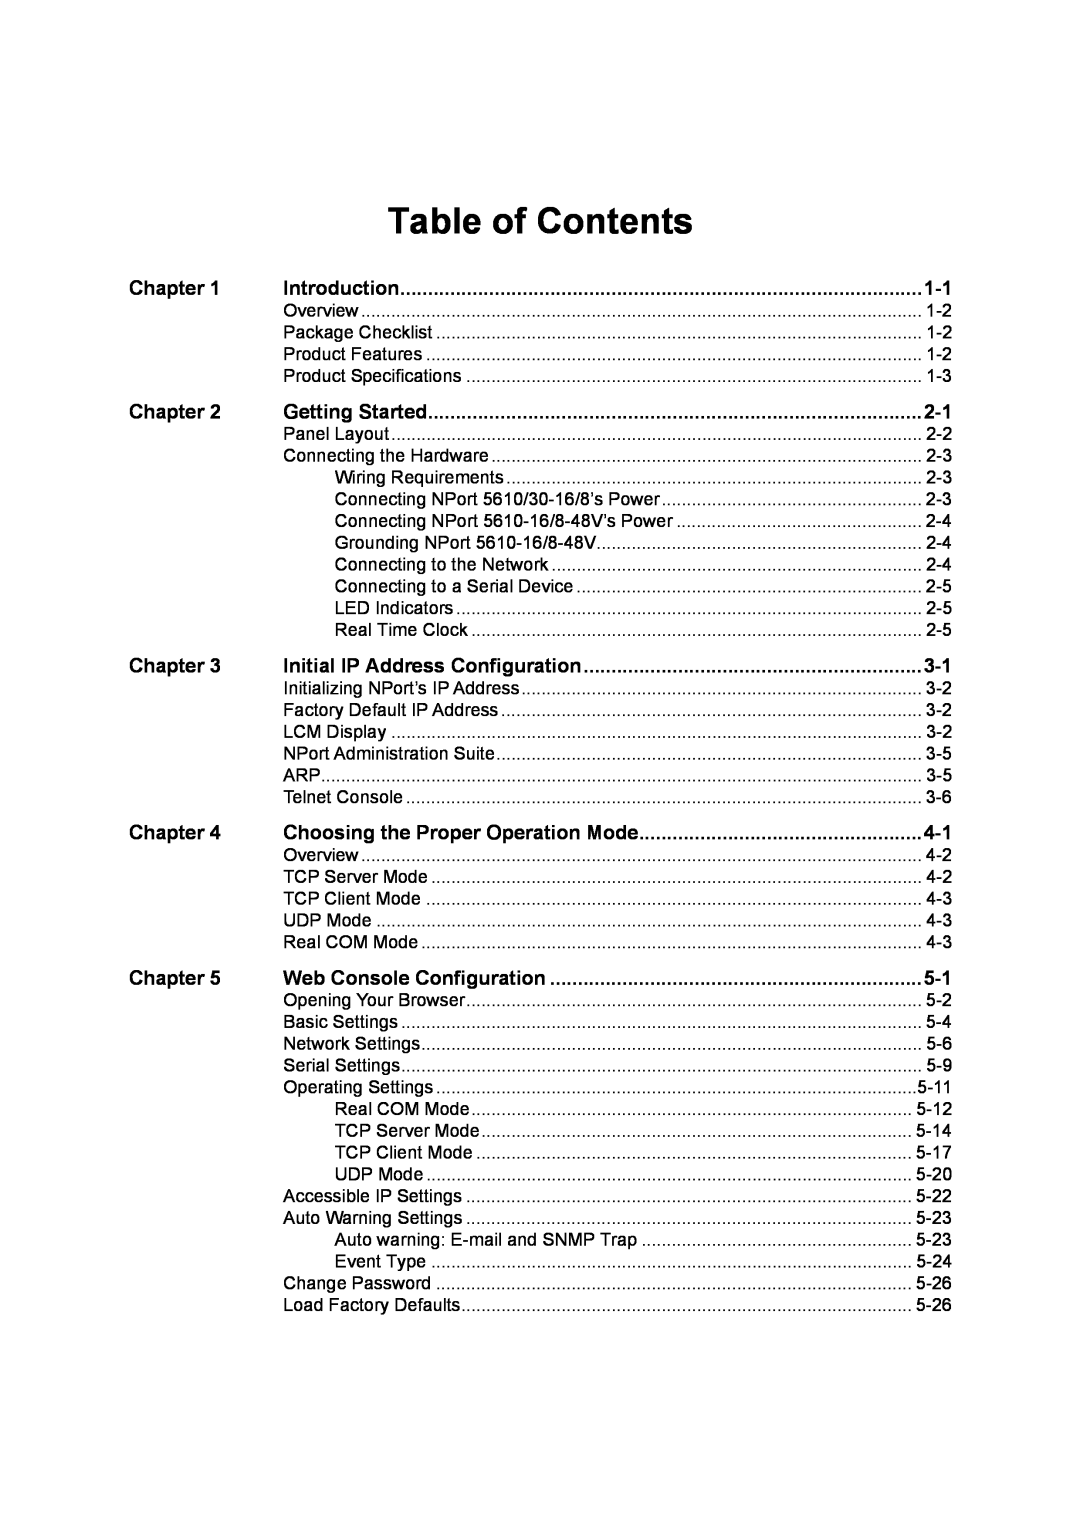 Moxa Technologies 5600 user manual Table of Contents, Choosing the Proper Operation Mode, Web Console Configuration 